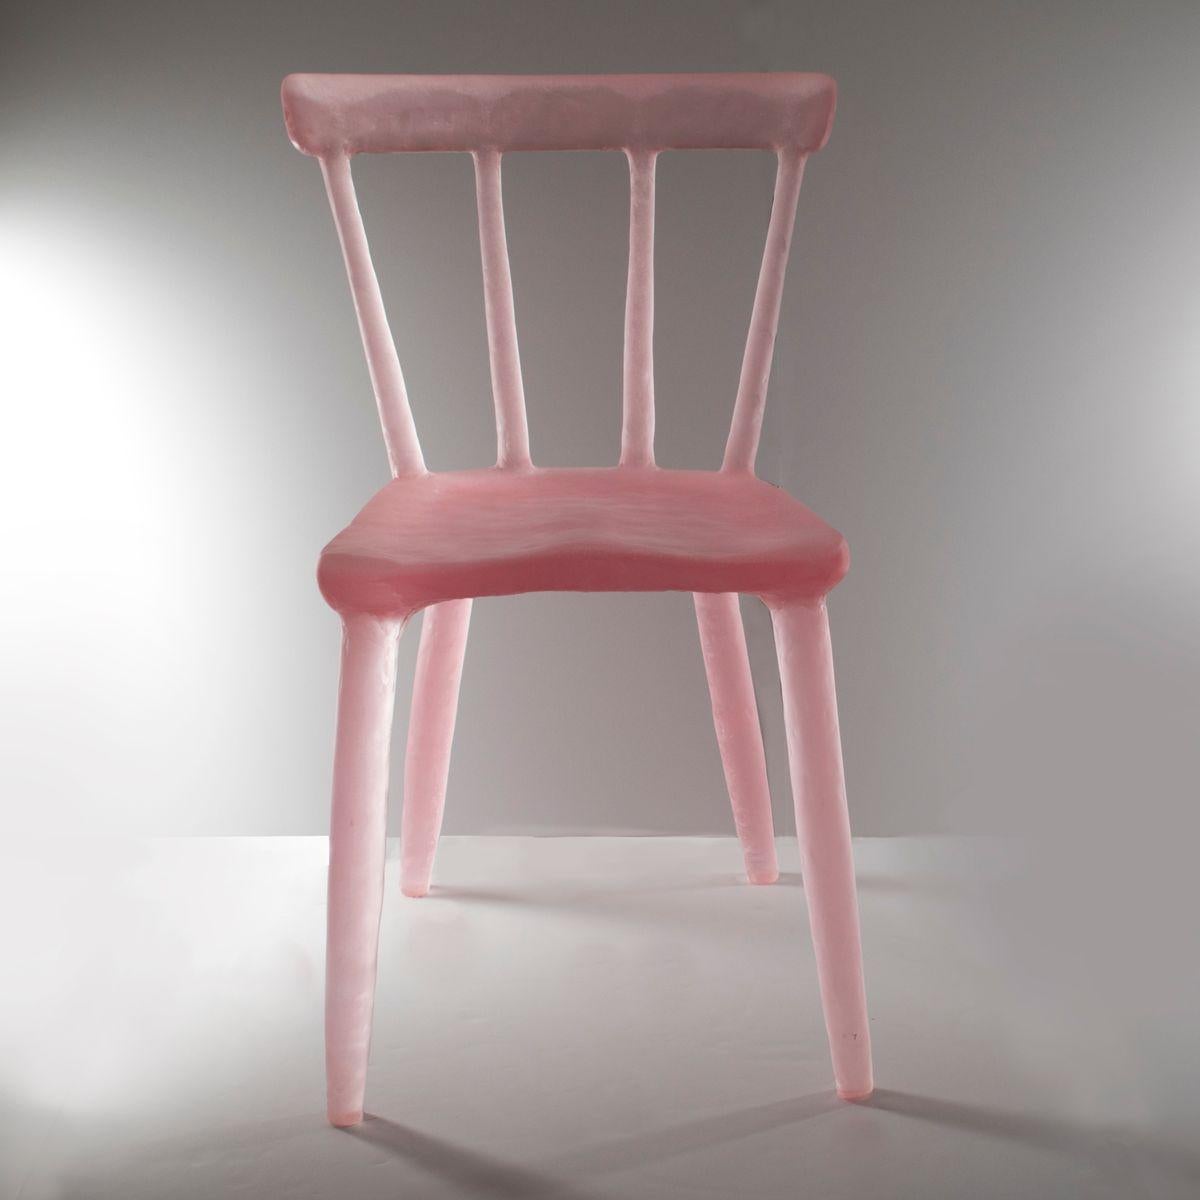 Translucent and whimsical, these chairs from NY designer Kim Markel are handcrafted from a variety of recycled plastics, both thermoset and thermoplastic. A specific blend of the plastics is combined in large molds. Once cured, the objects are